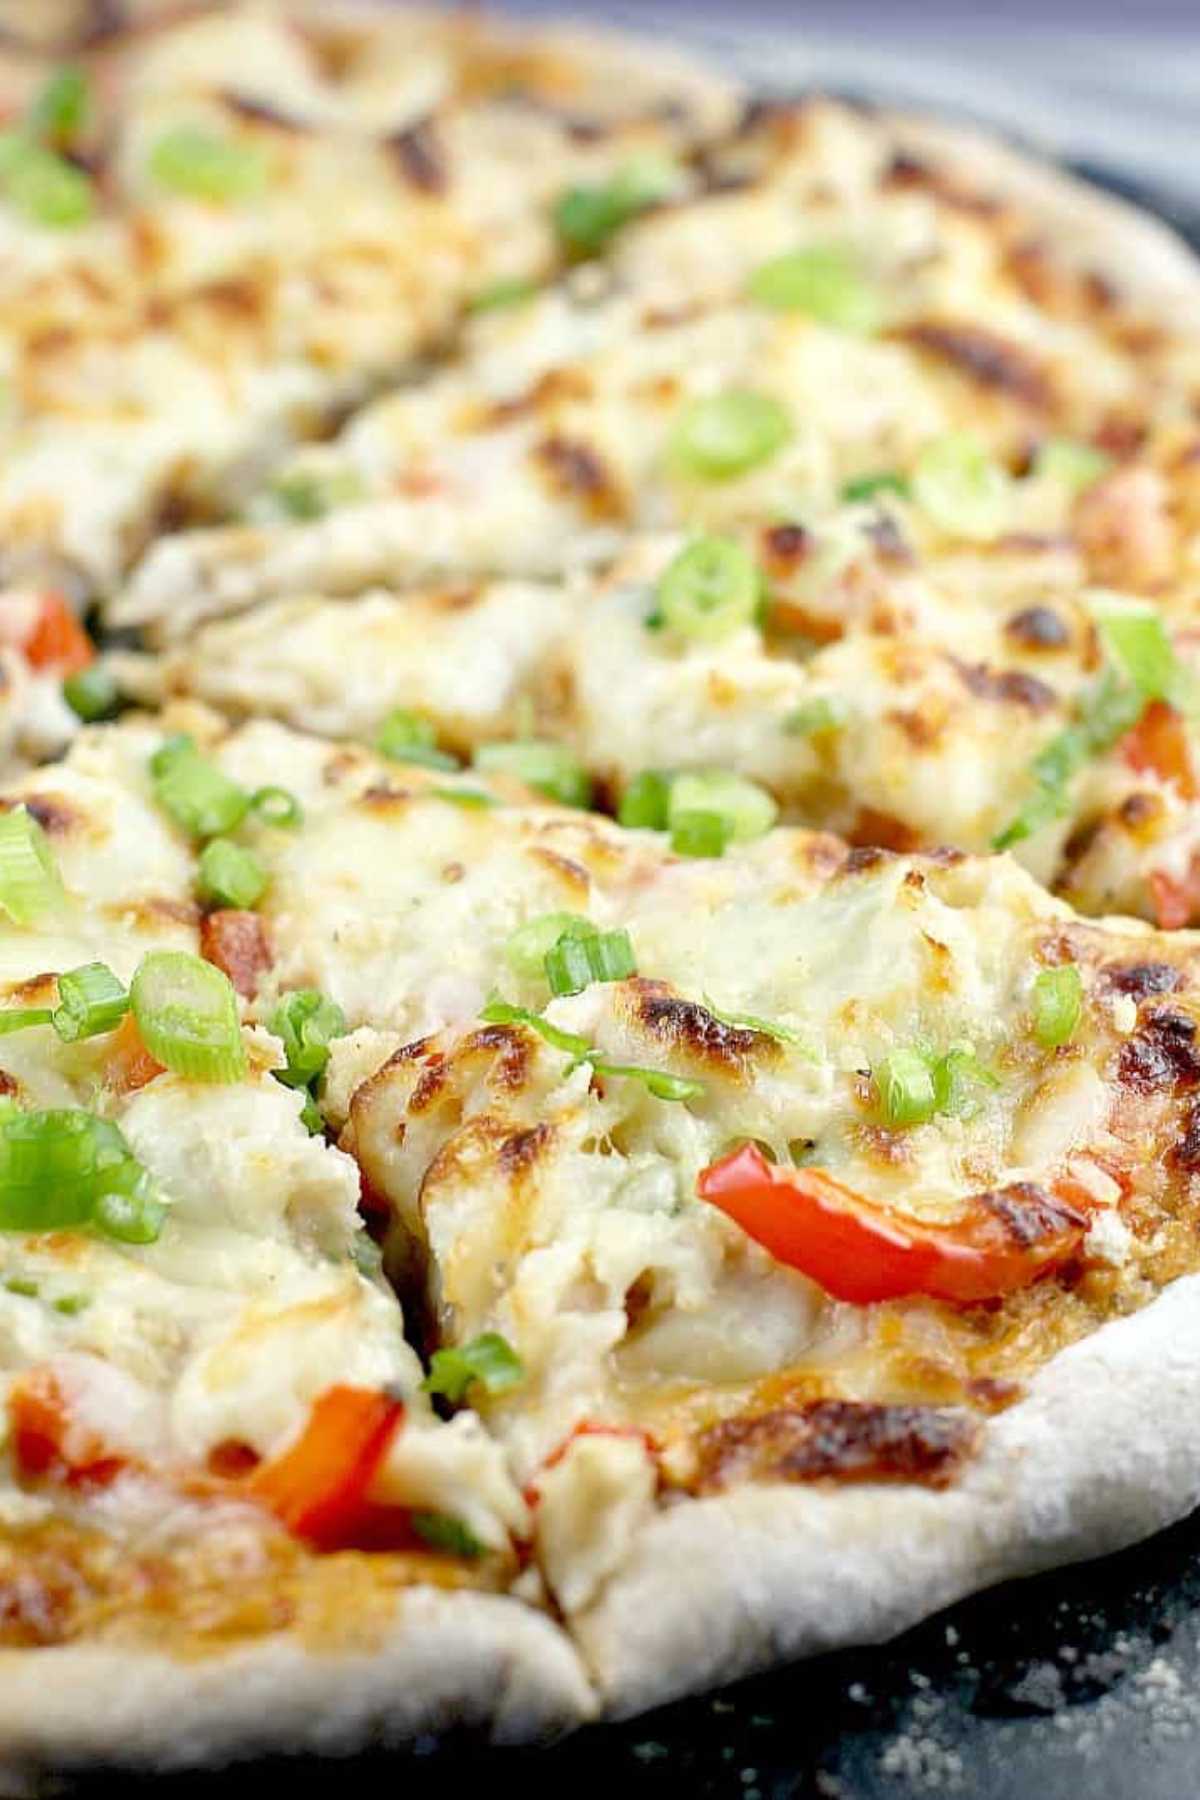 Pizza topped with cheese, red pepper and crab.